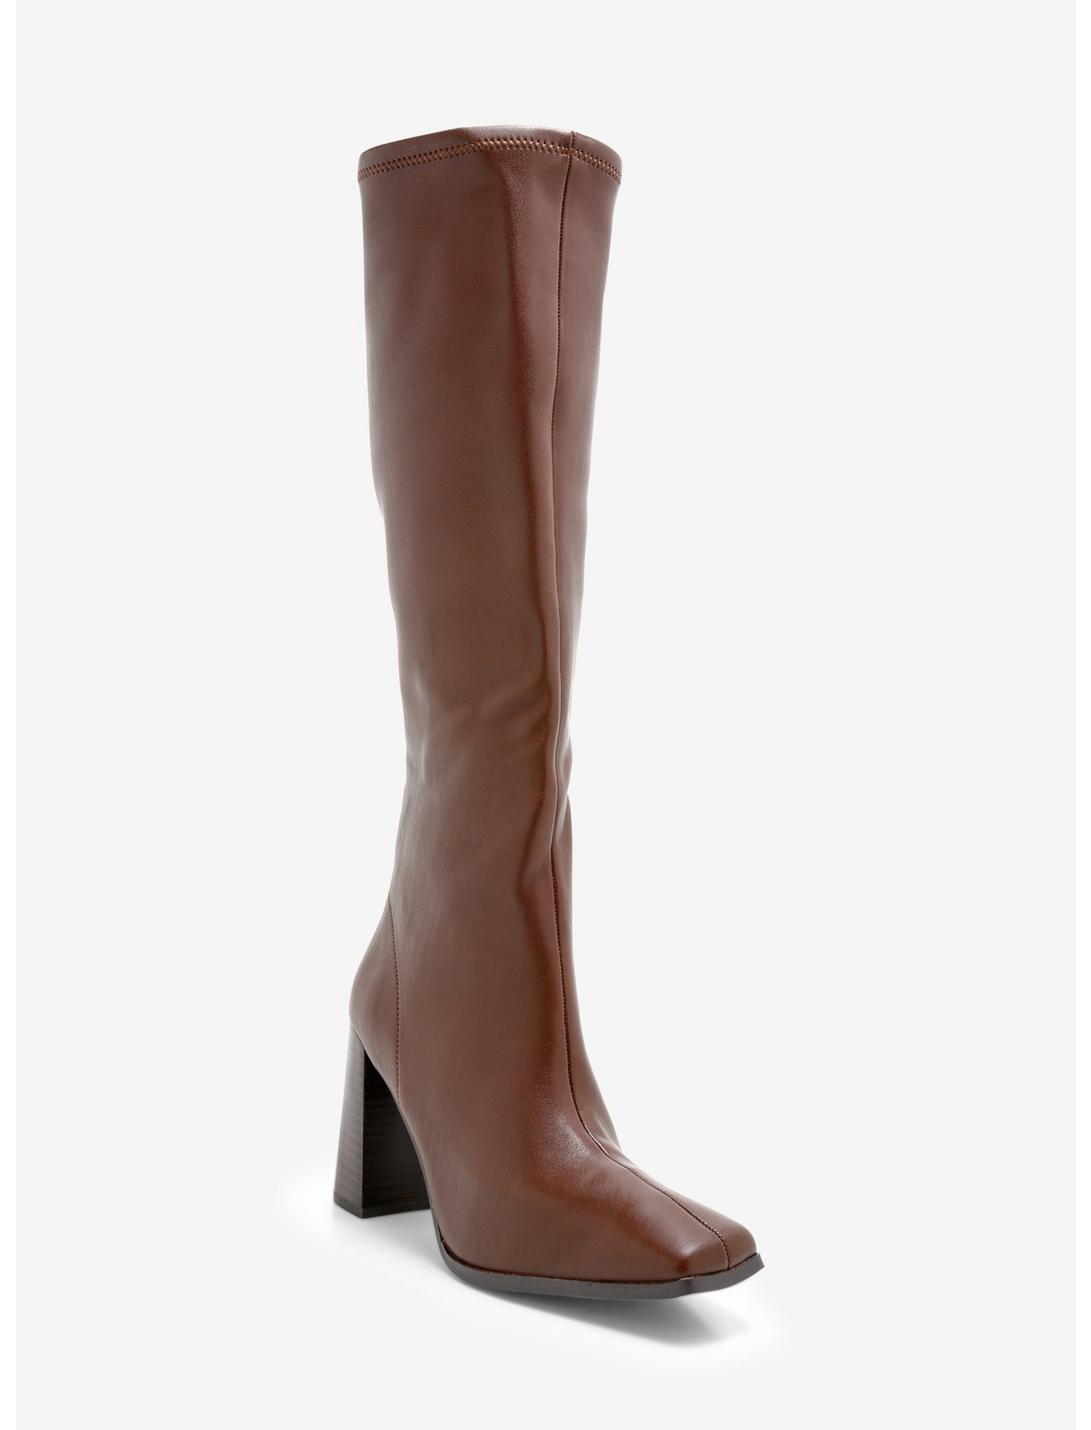 Chinese Laundry Brown Faux Leather Knee-High Boots, MULTI, hi-res